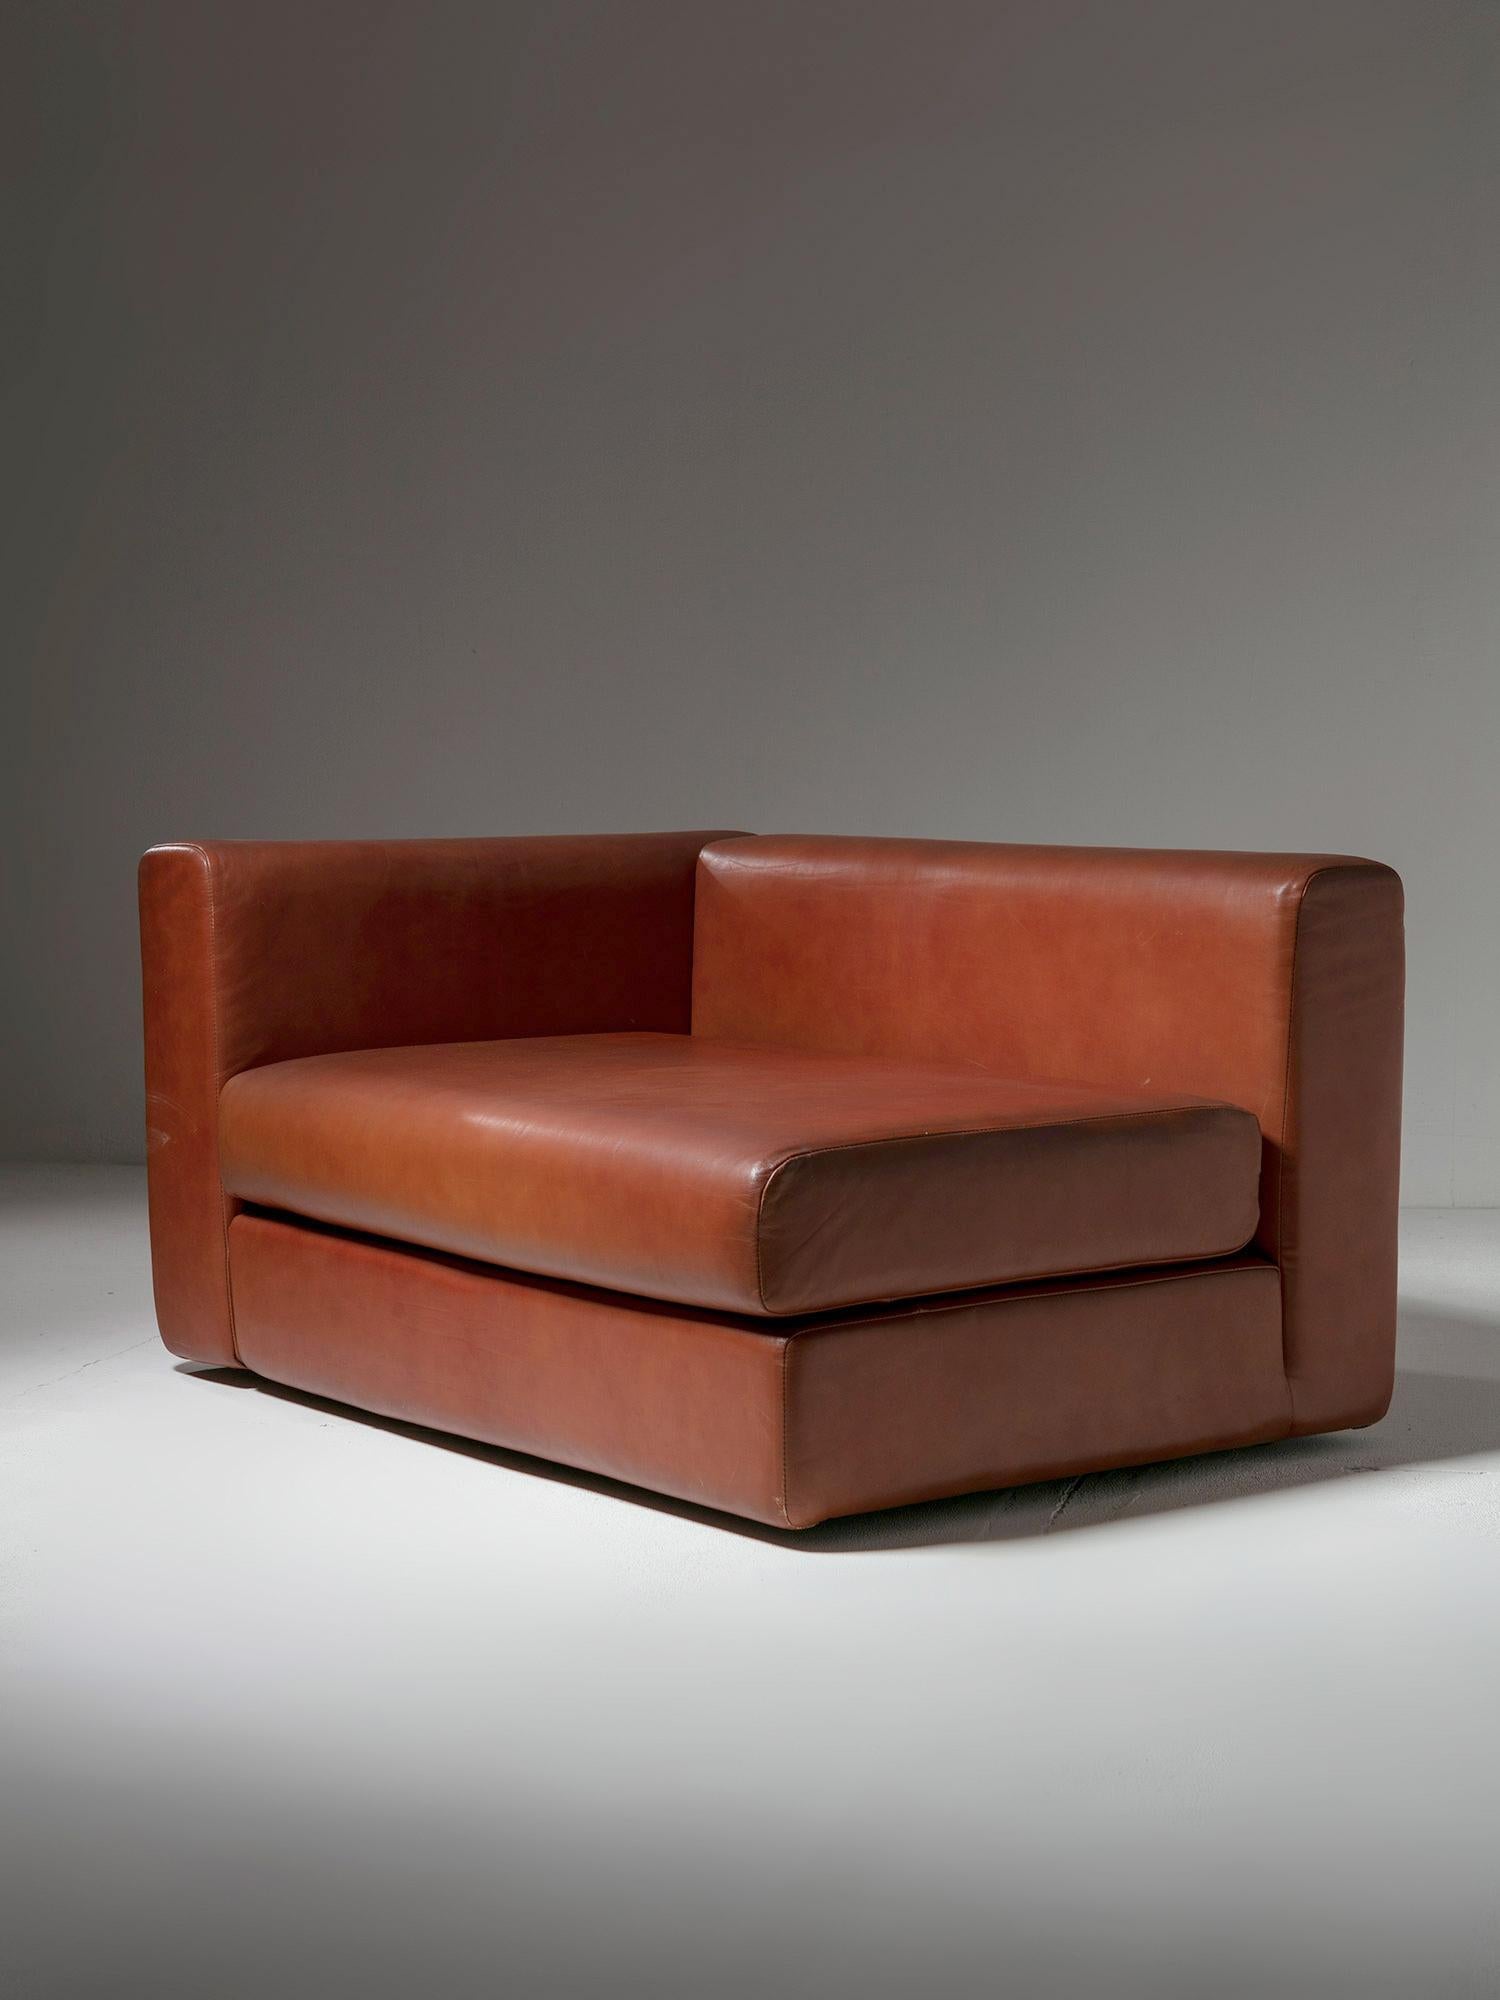 Rare Bacone lounge chair by Cini Boeri for Arflex.
Extra large piece with generous squared proportions.